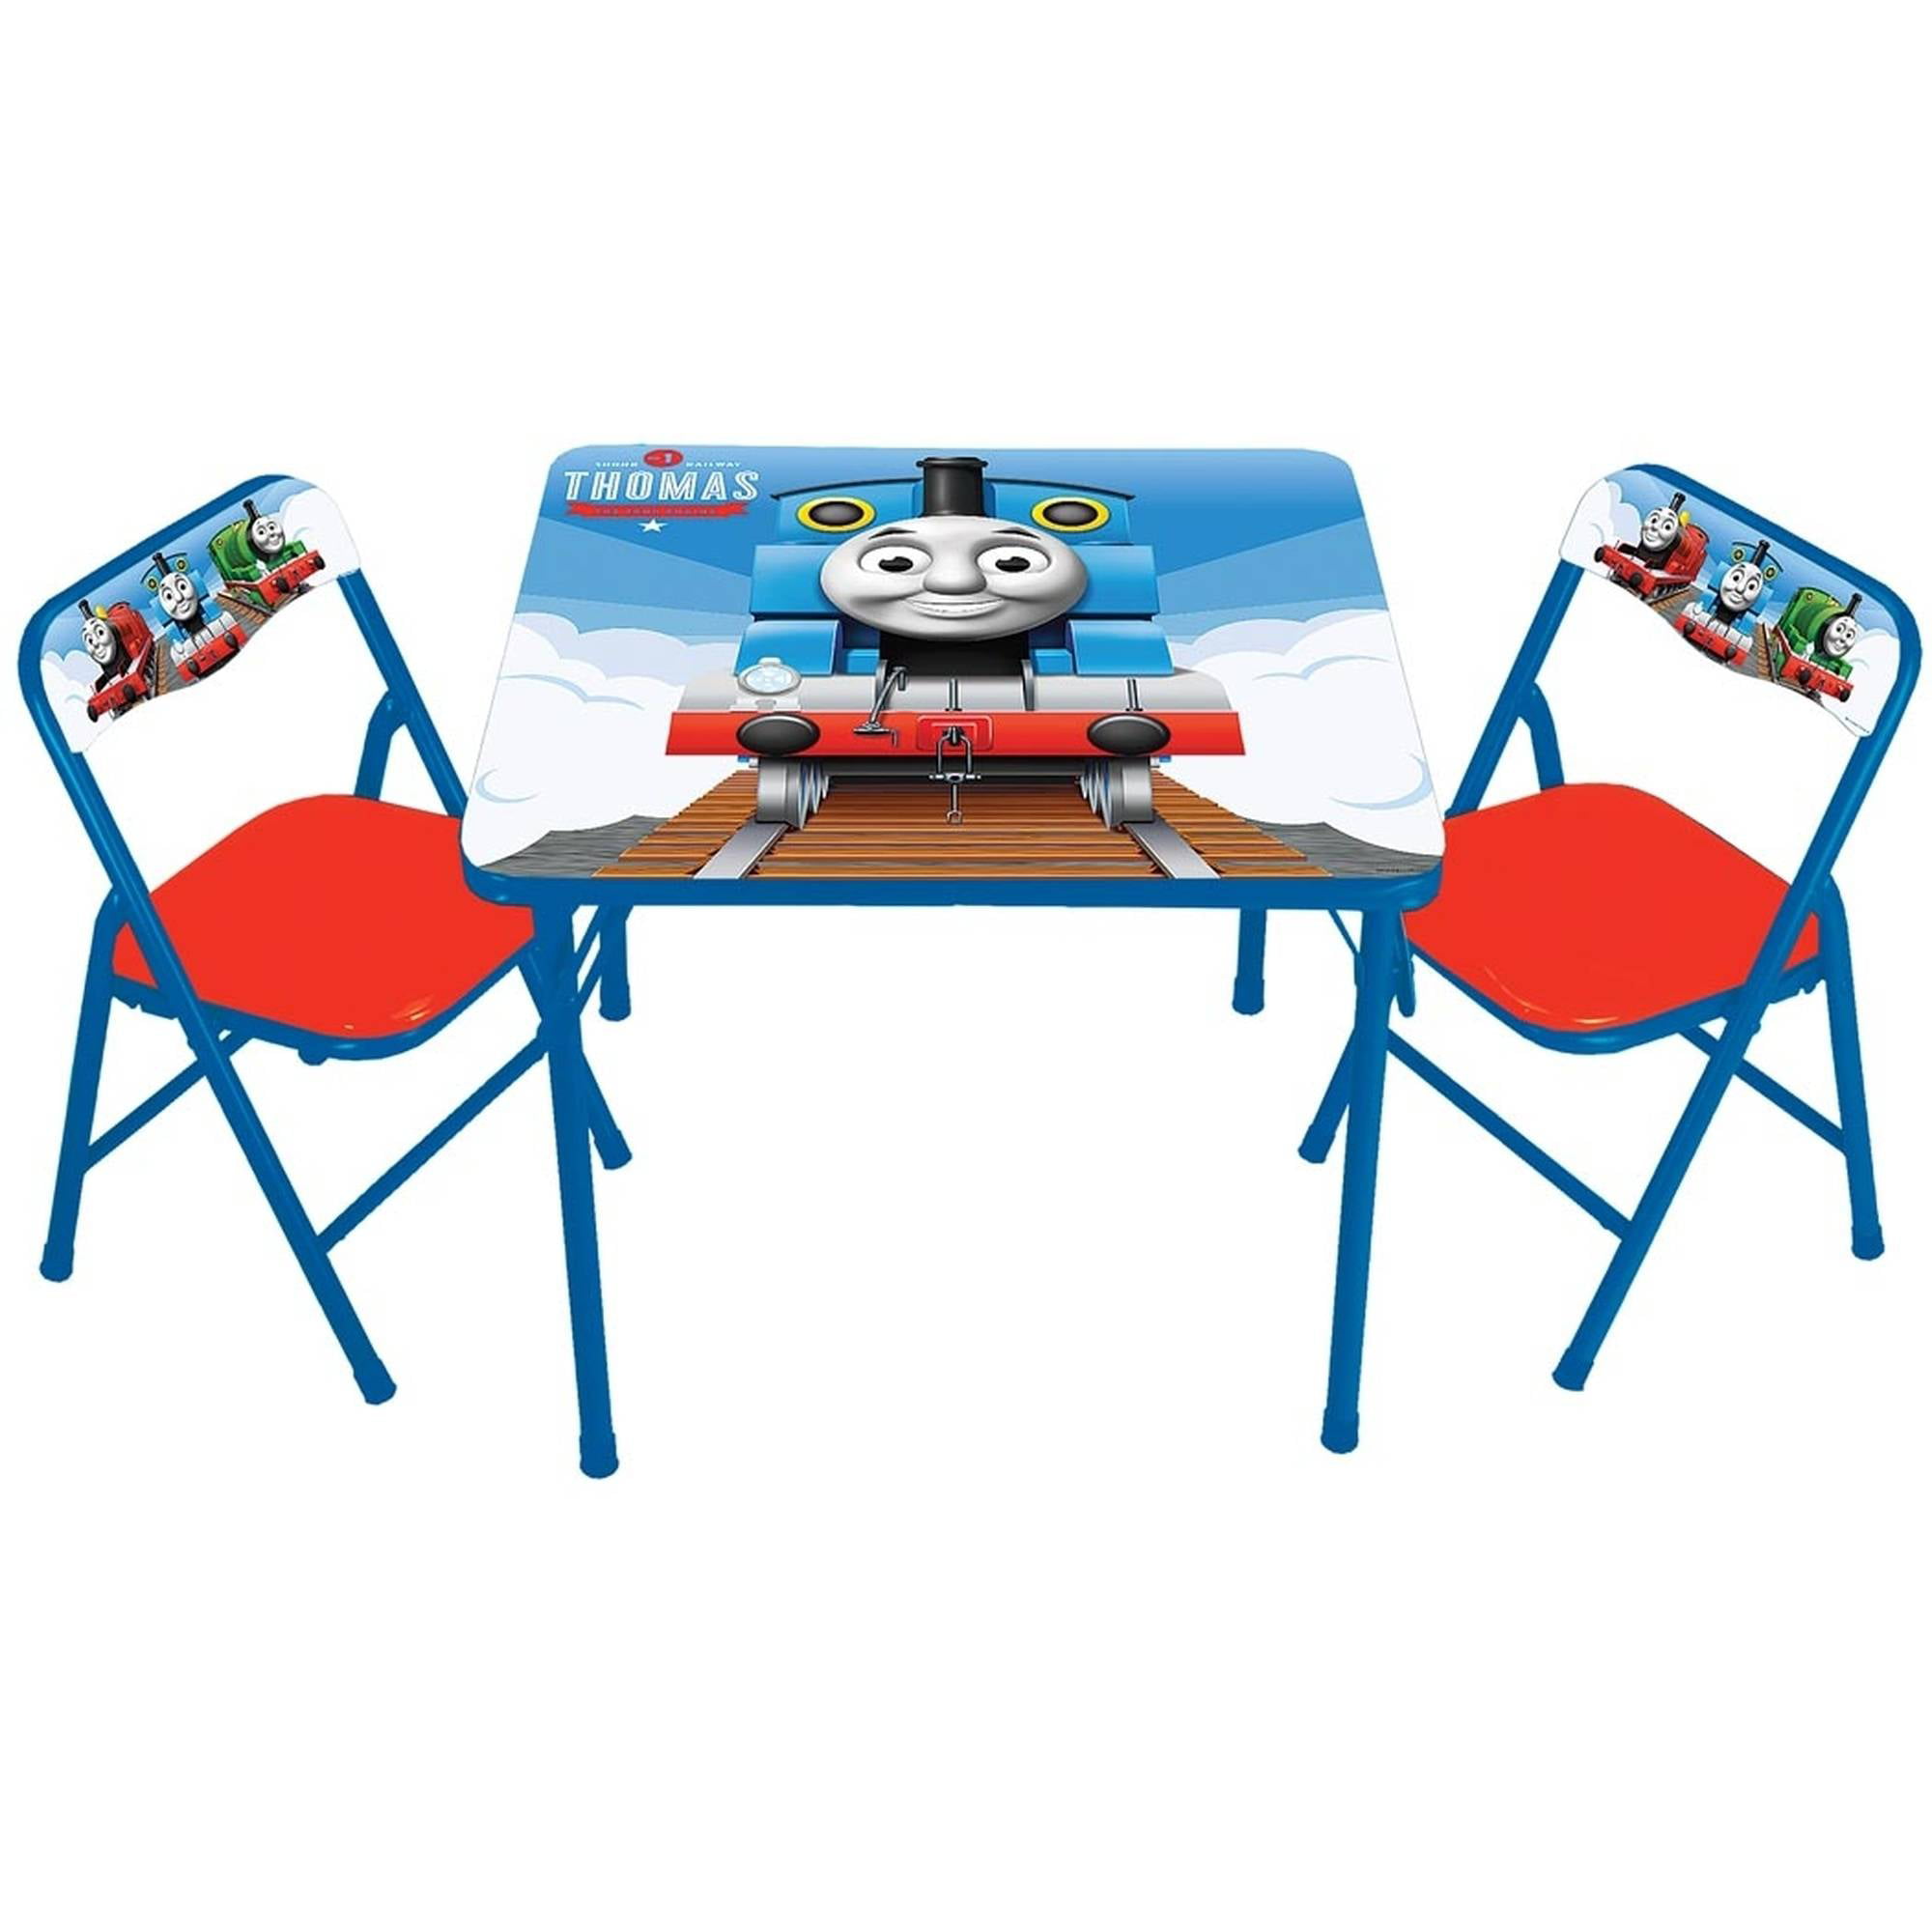 children's portable table and chairs